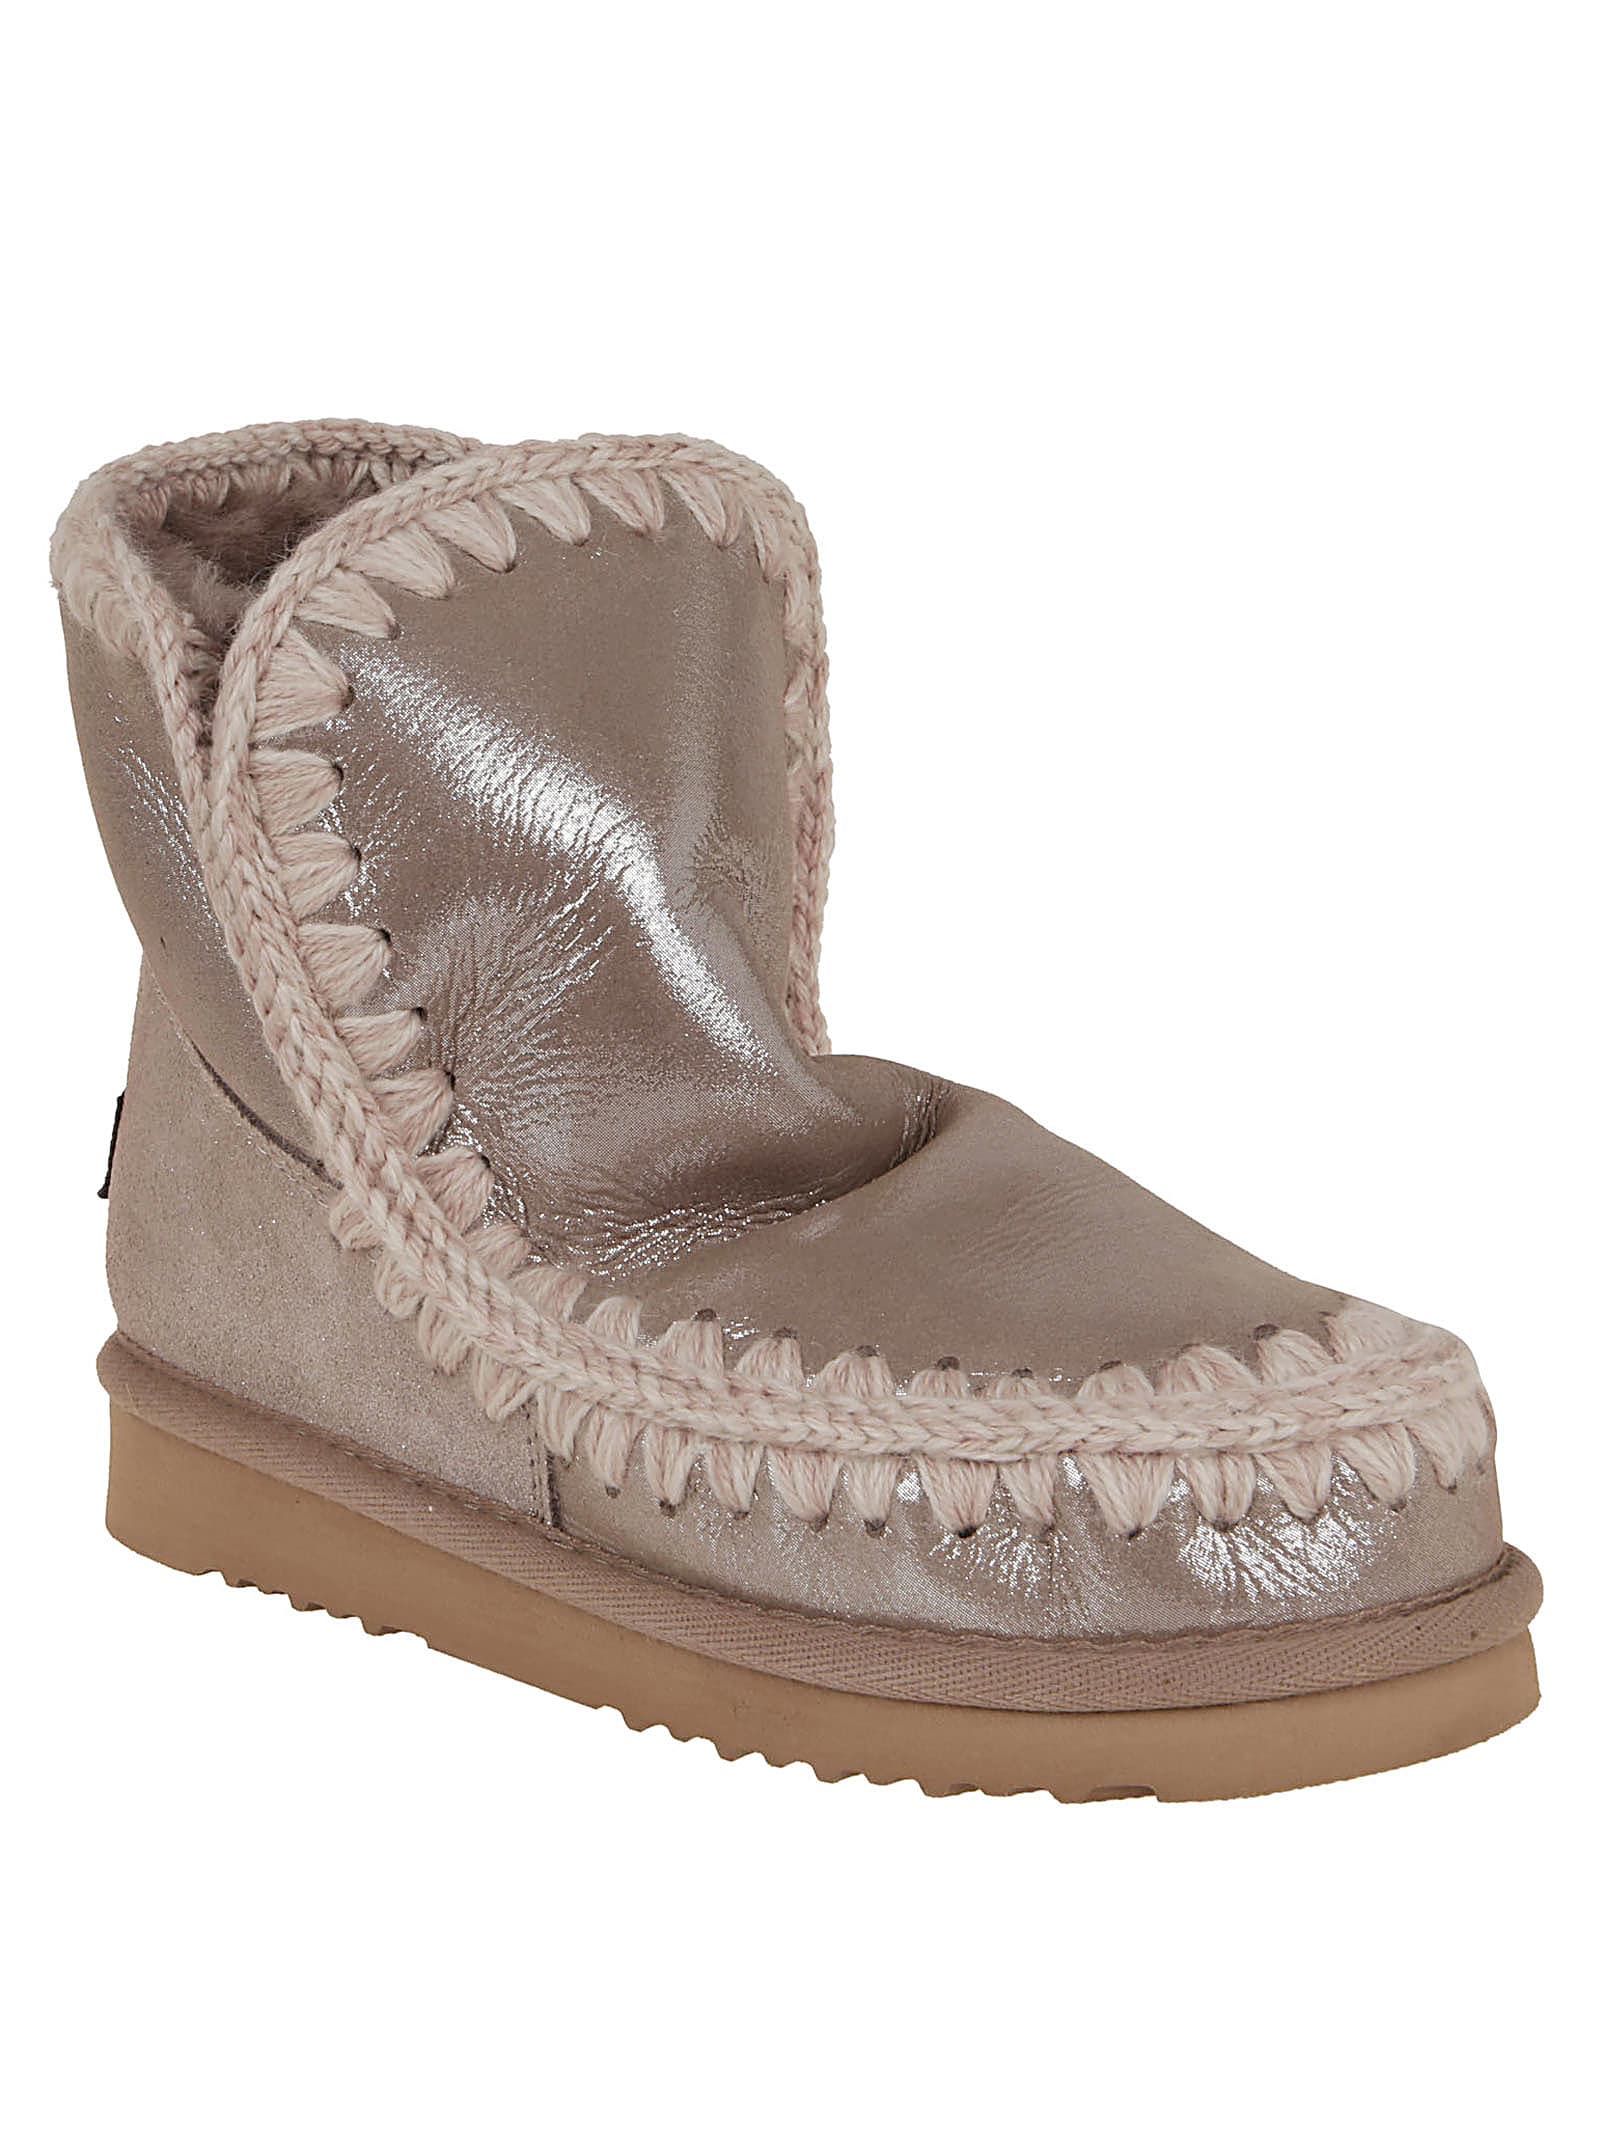 mou boots anthropologie